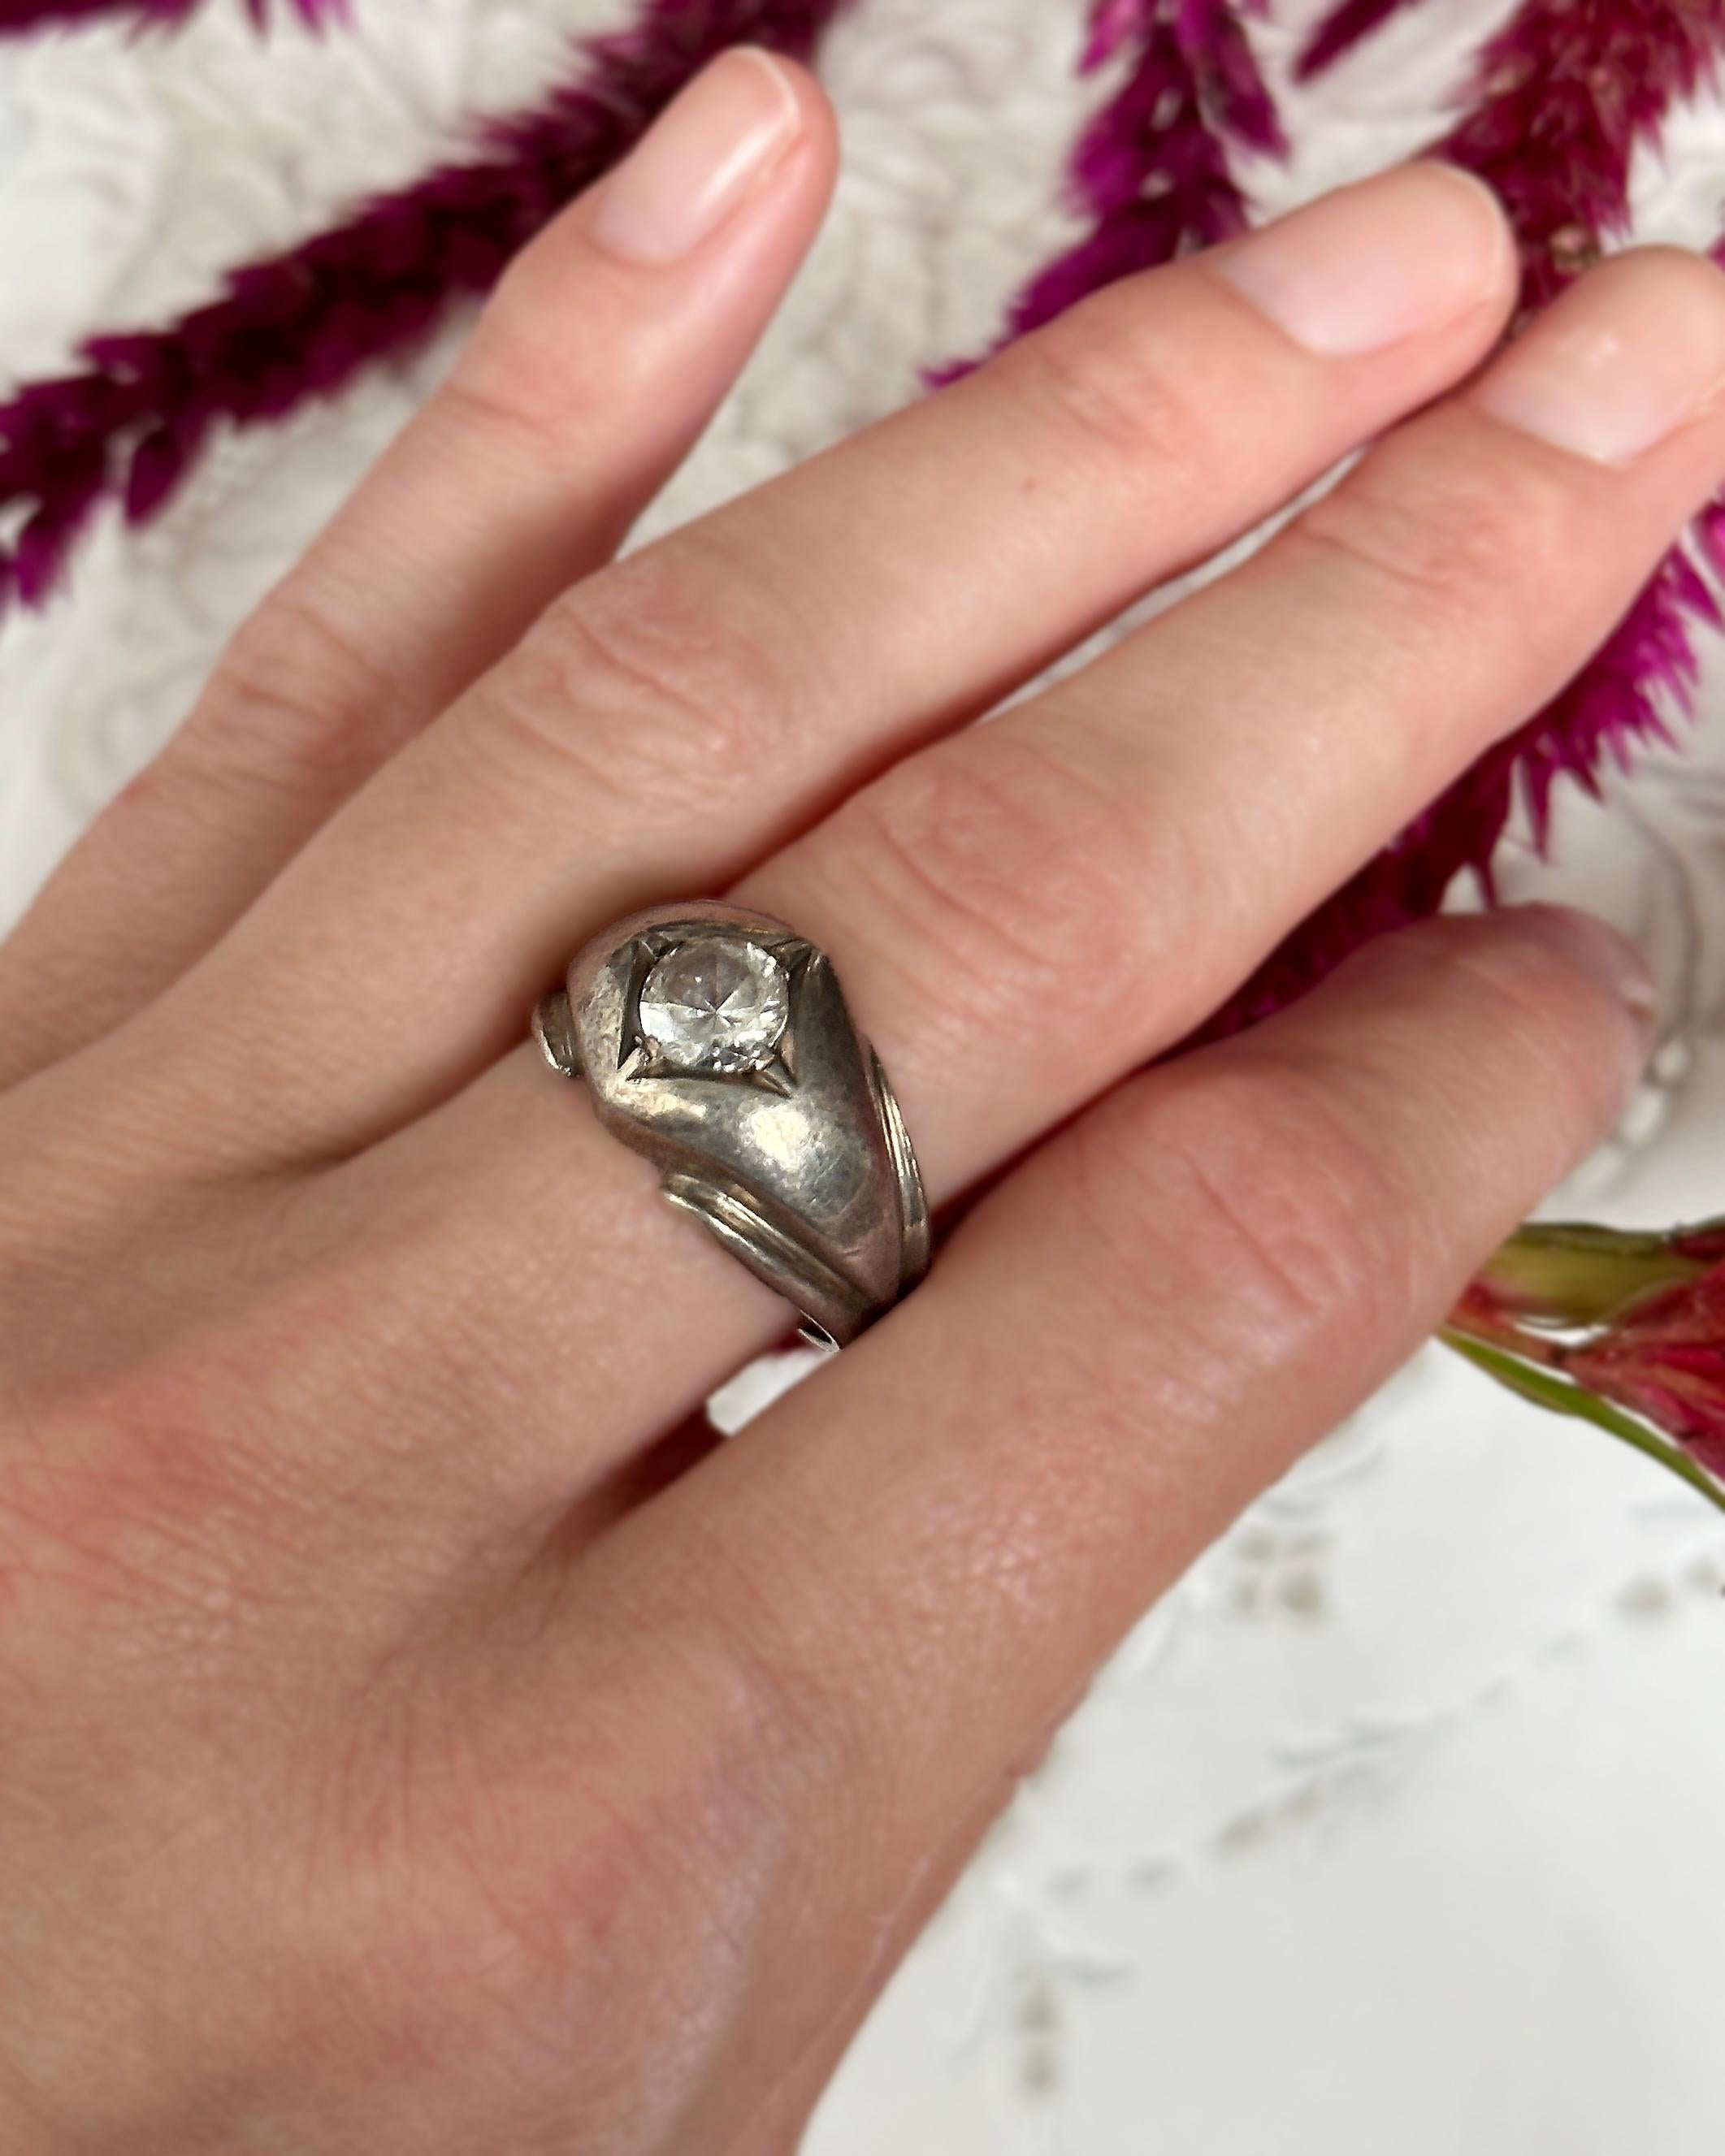 I adore flush-set / flush-mount rings, and this vintage ring is just perfect. It is crafted of sterling silver, and set with a single large crystal in a starburst setting. These rings became popular during the Victorian era; in an effort to conceal